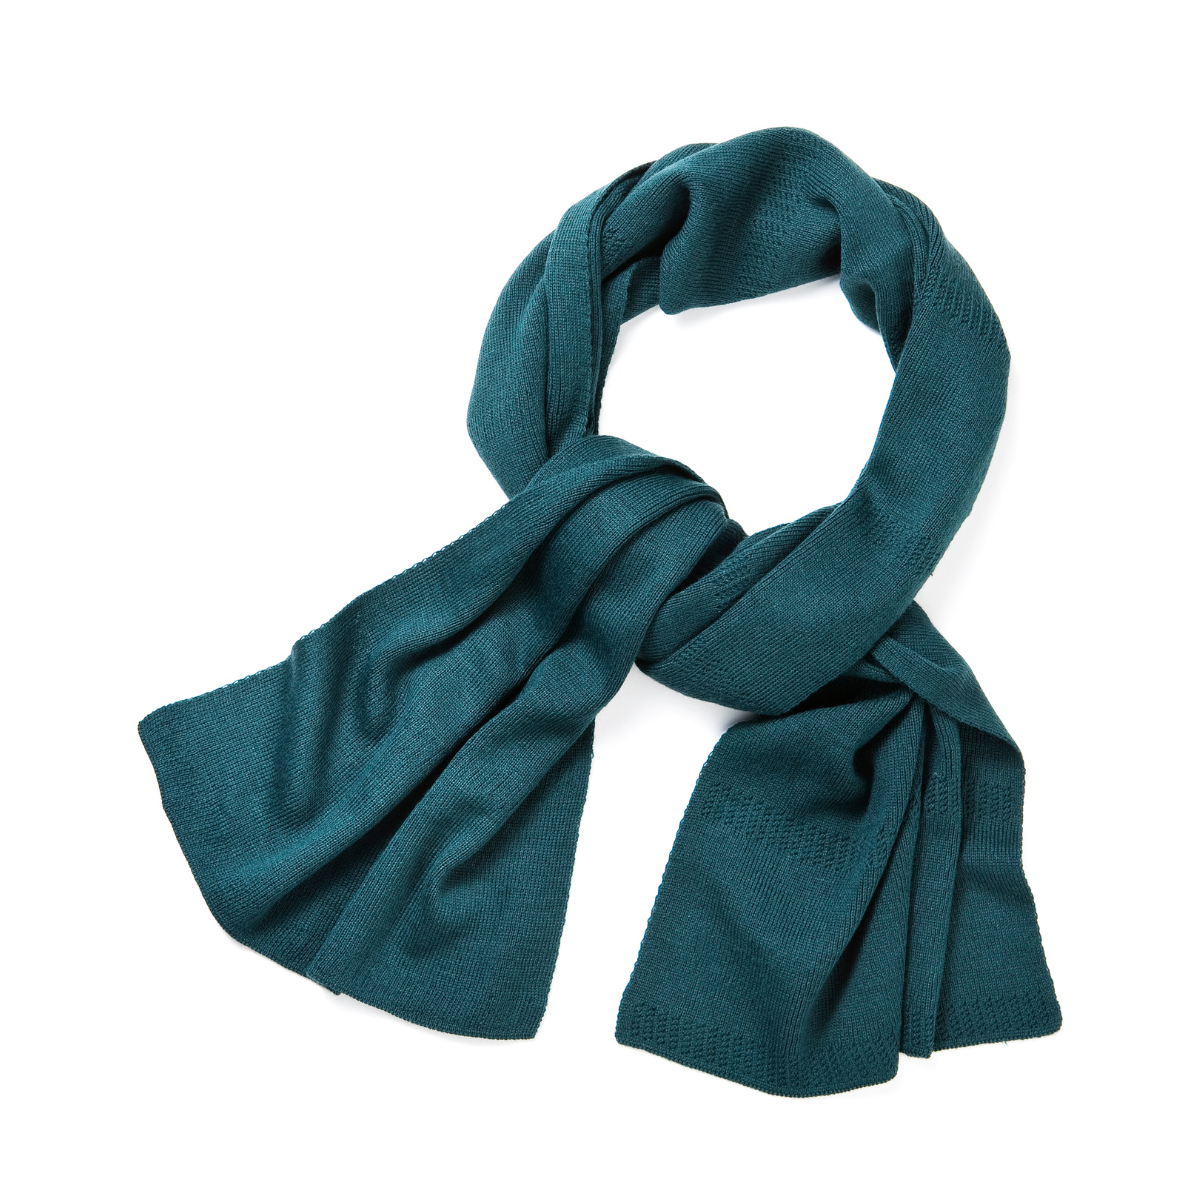 29. Elevate Your Style with a Timeless Linen Infinity Scarf - Perfect 8th Anniversary Gift